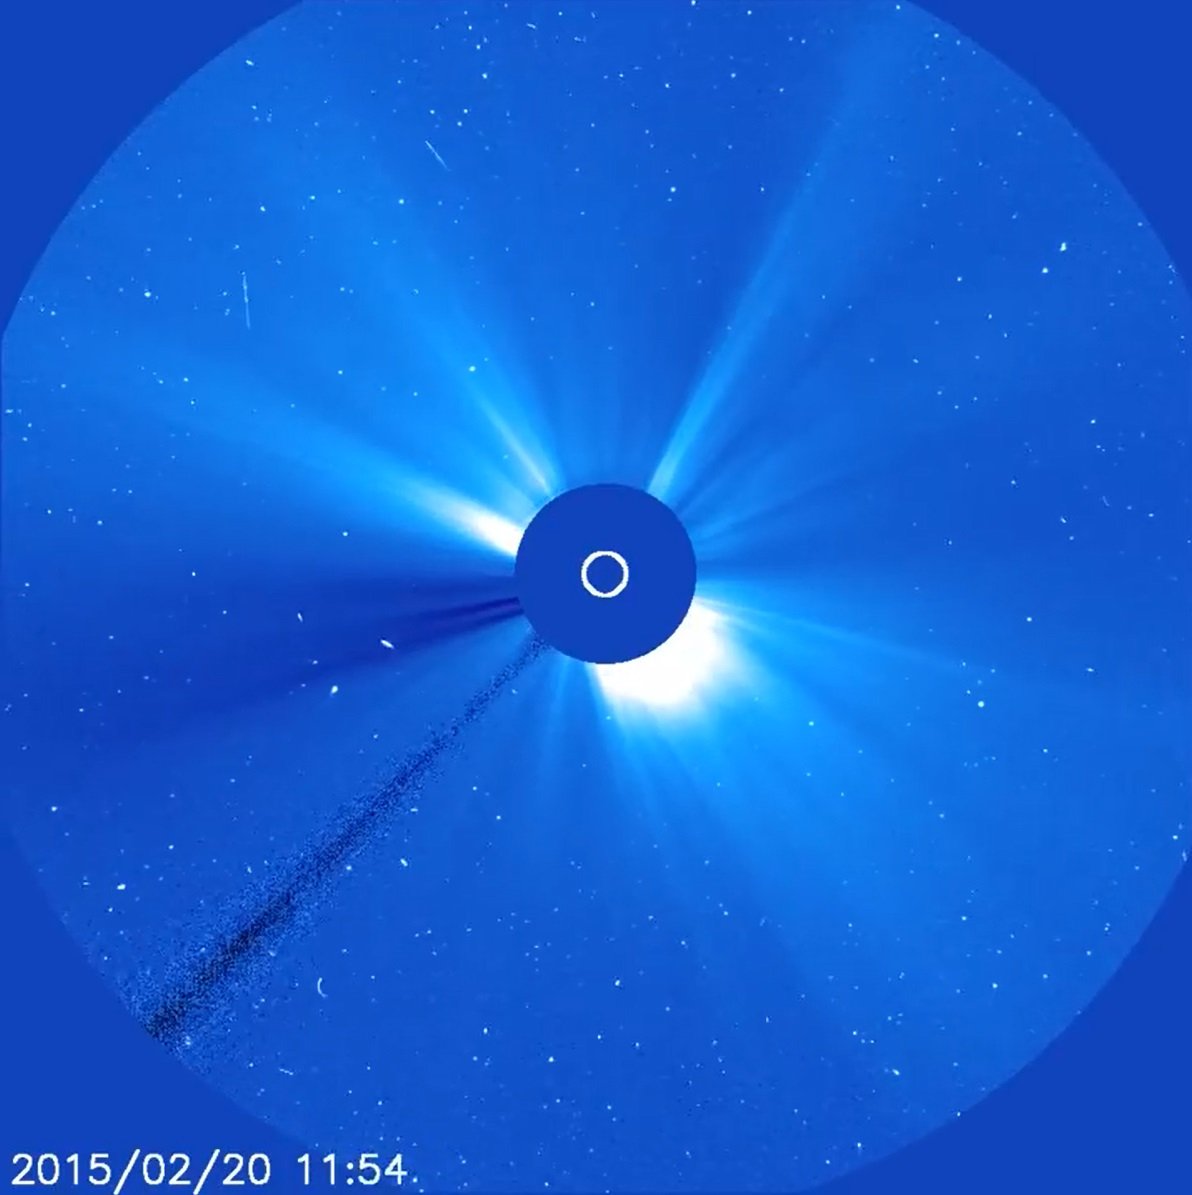 Amazing Comet Soho 2875 Survives Close Encounter With the Sun